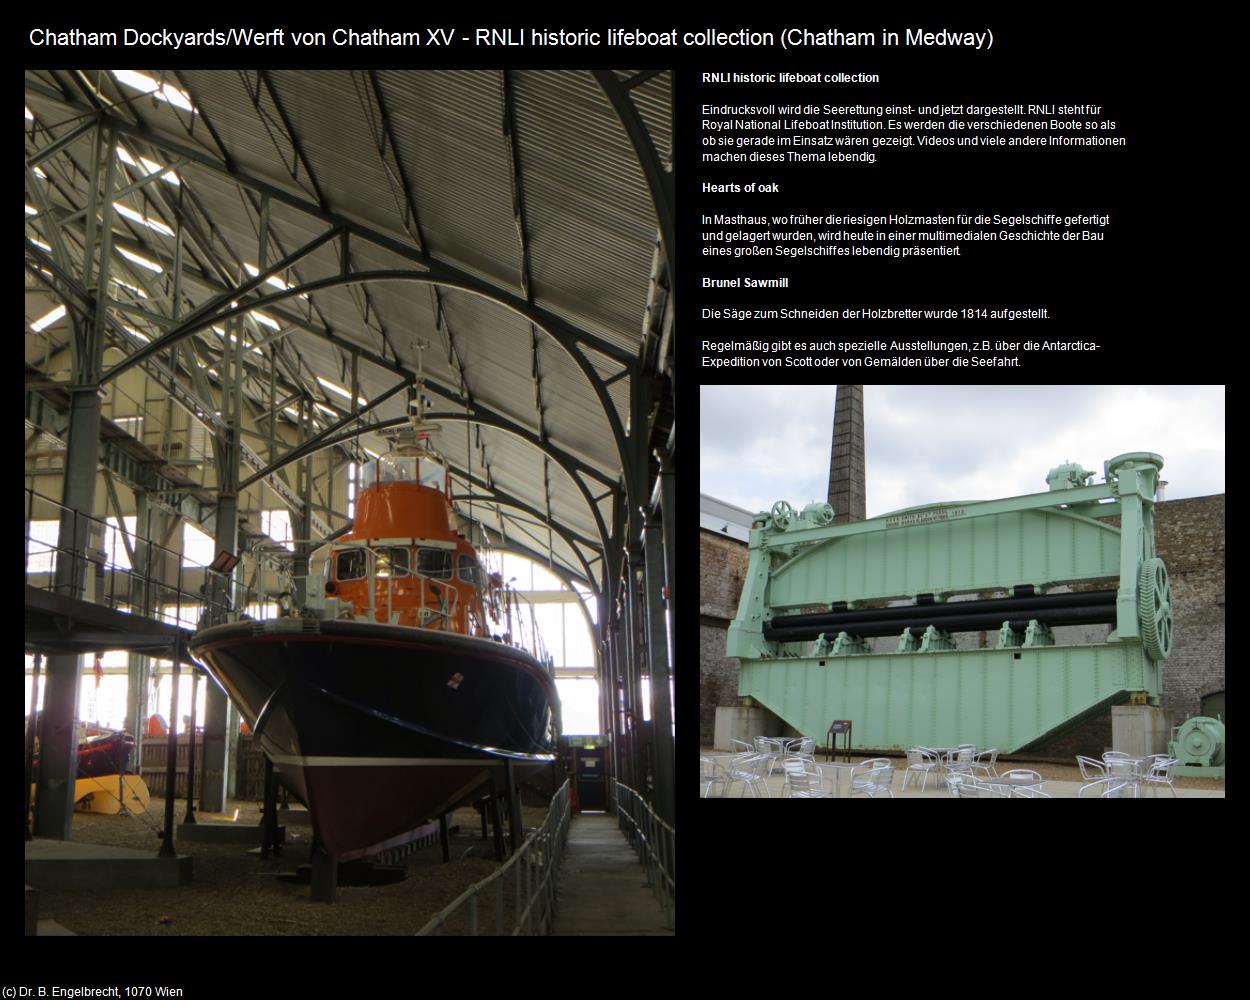 Historic Lifeboat Collection/Rettungsboote (Chatham in Medway, England) in Kulturatlas-ENGLAND und WALES